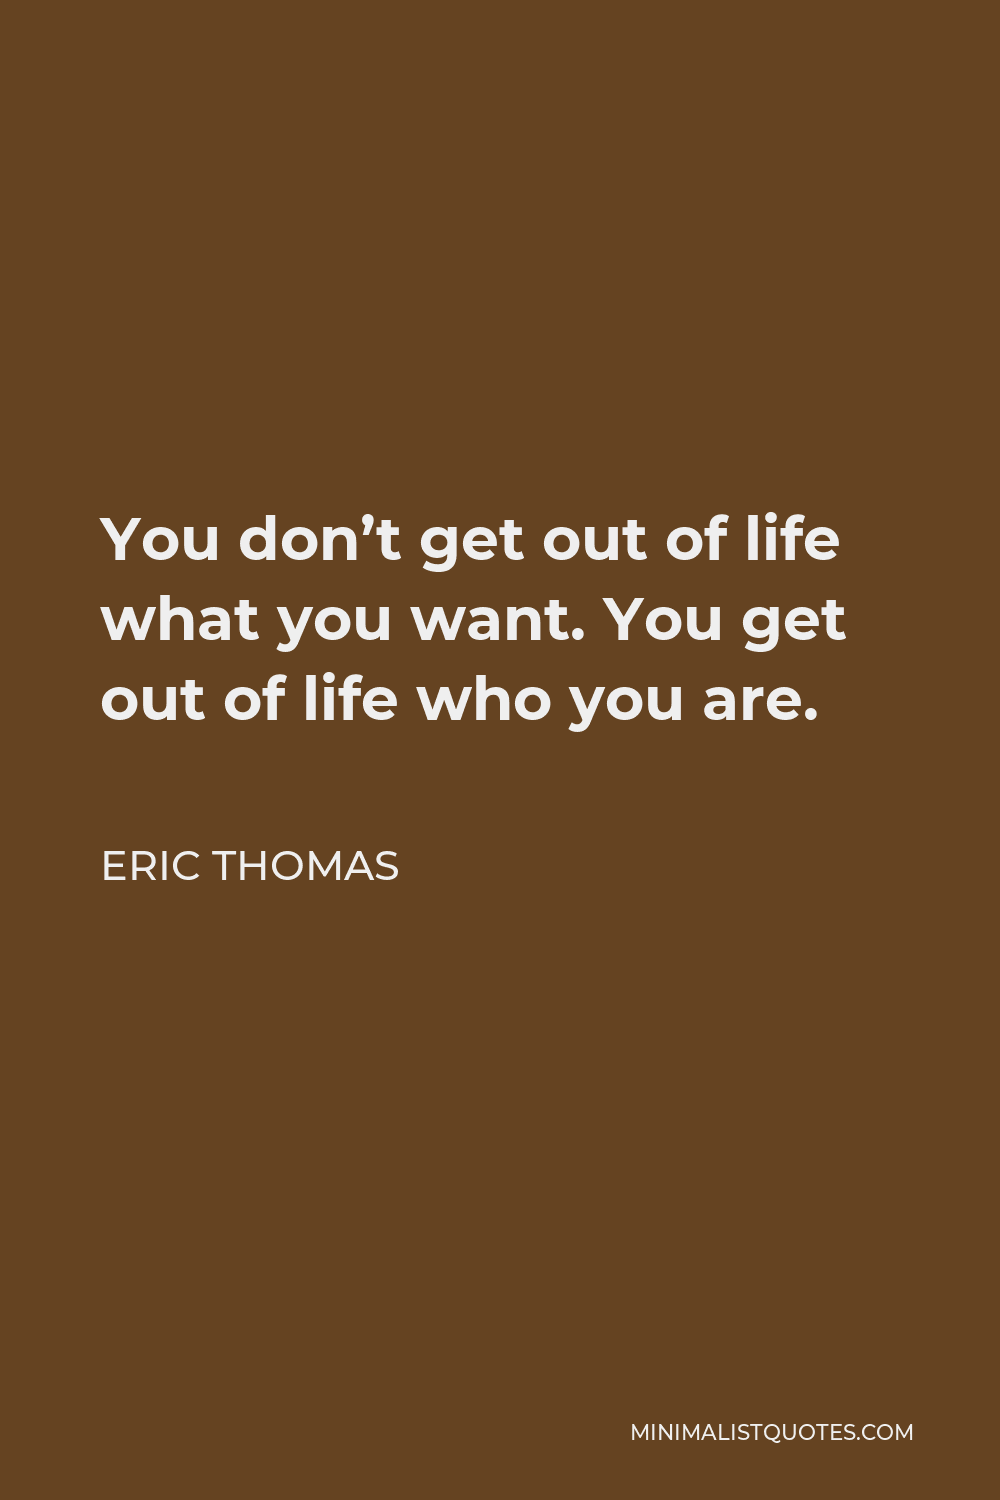 Eric Thomas Quote - You don’t get out of life what you want. You get out of life who you are.